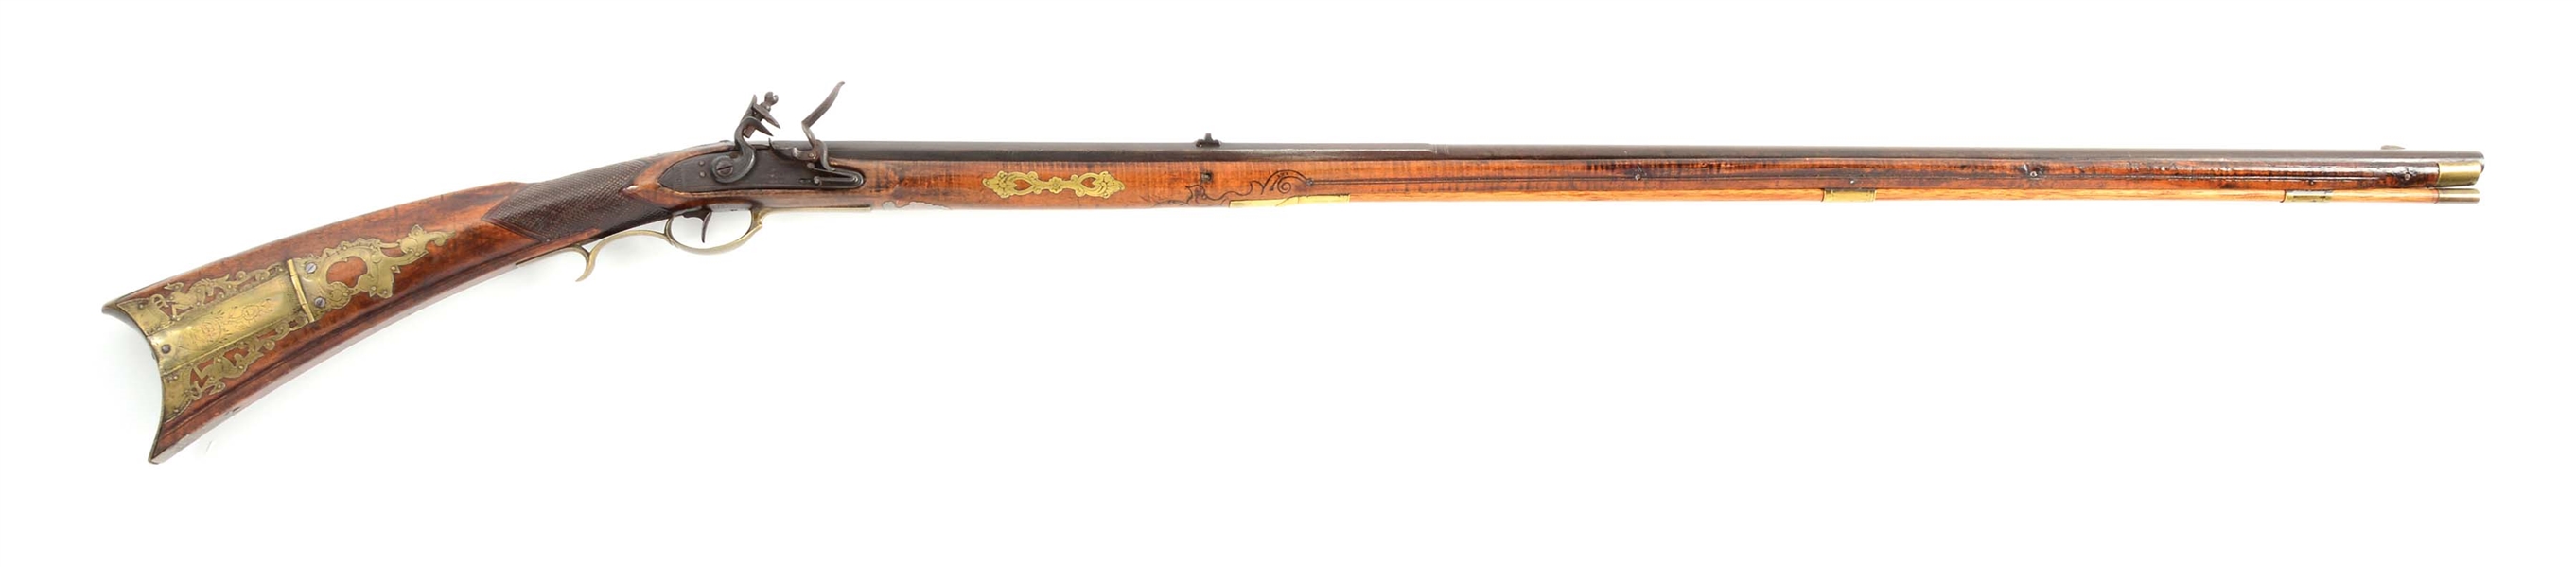 (A) EXTRAORDINARY FLINTLOCK KENTUCKY RIFLE WITH PENNSYLVANIA STATE SEAL ON PATCHBOX, ATTRIBUTED TO JACOB KUNTZ.